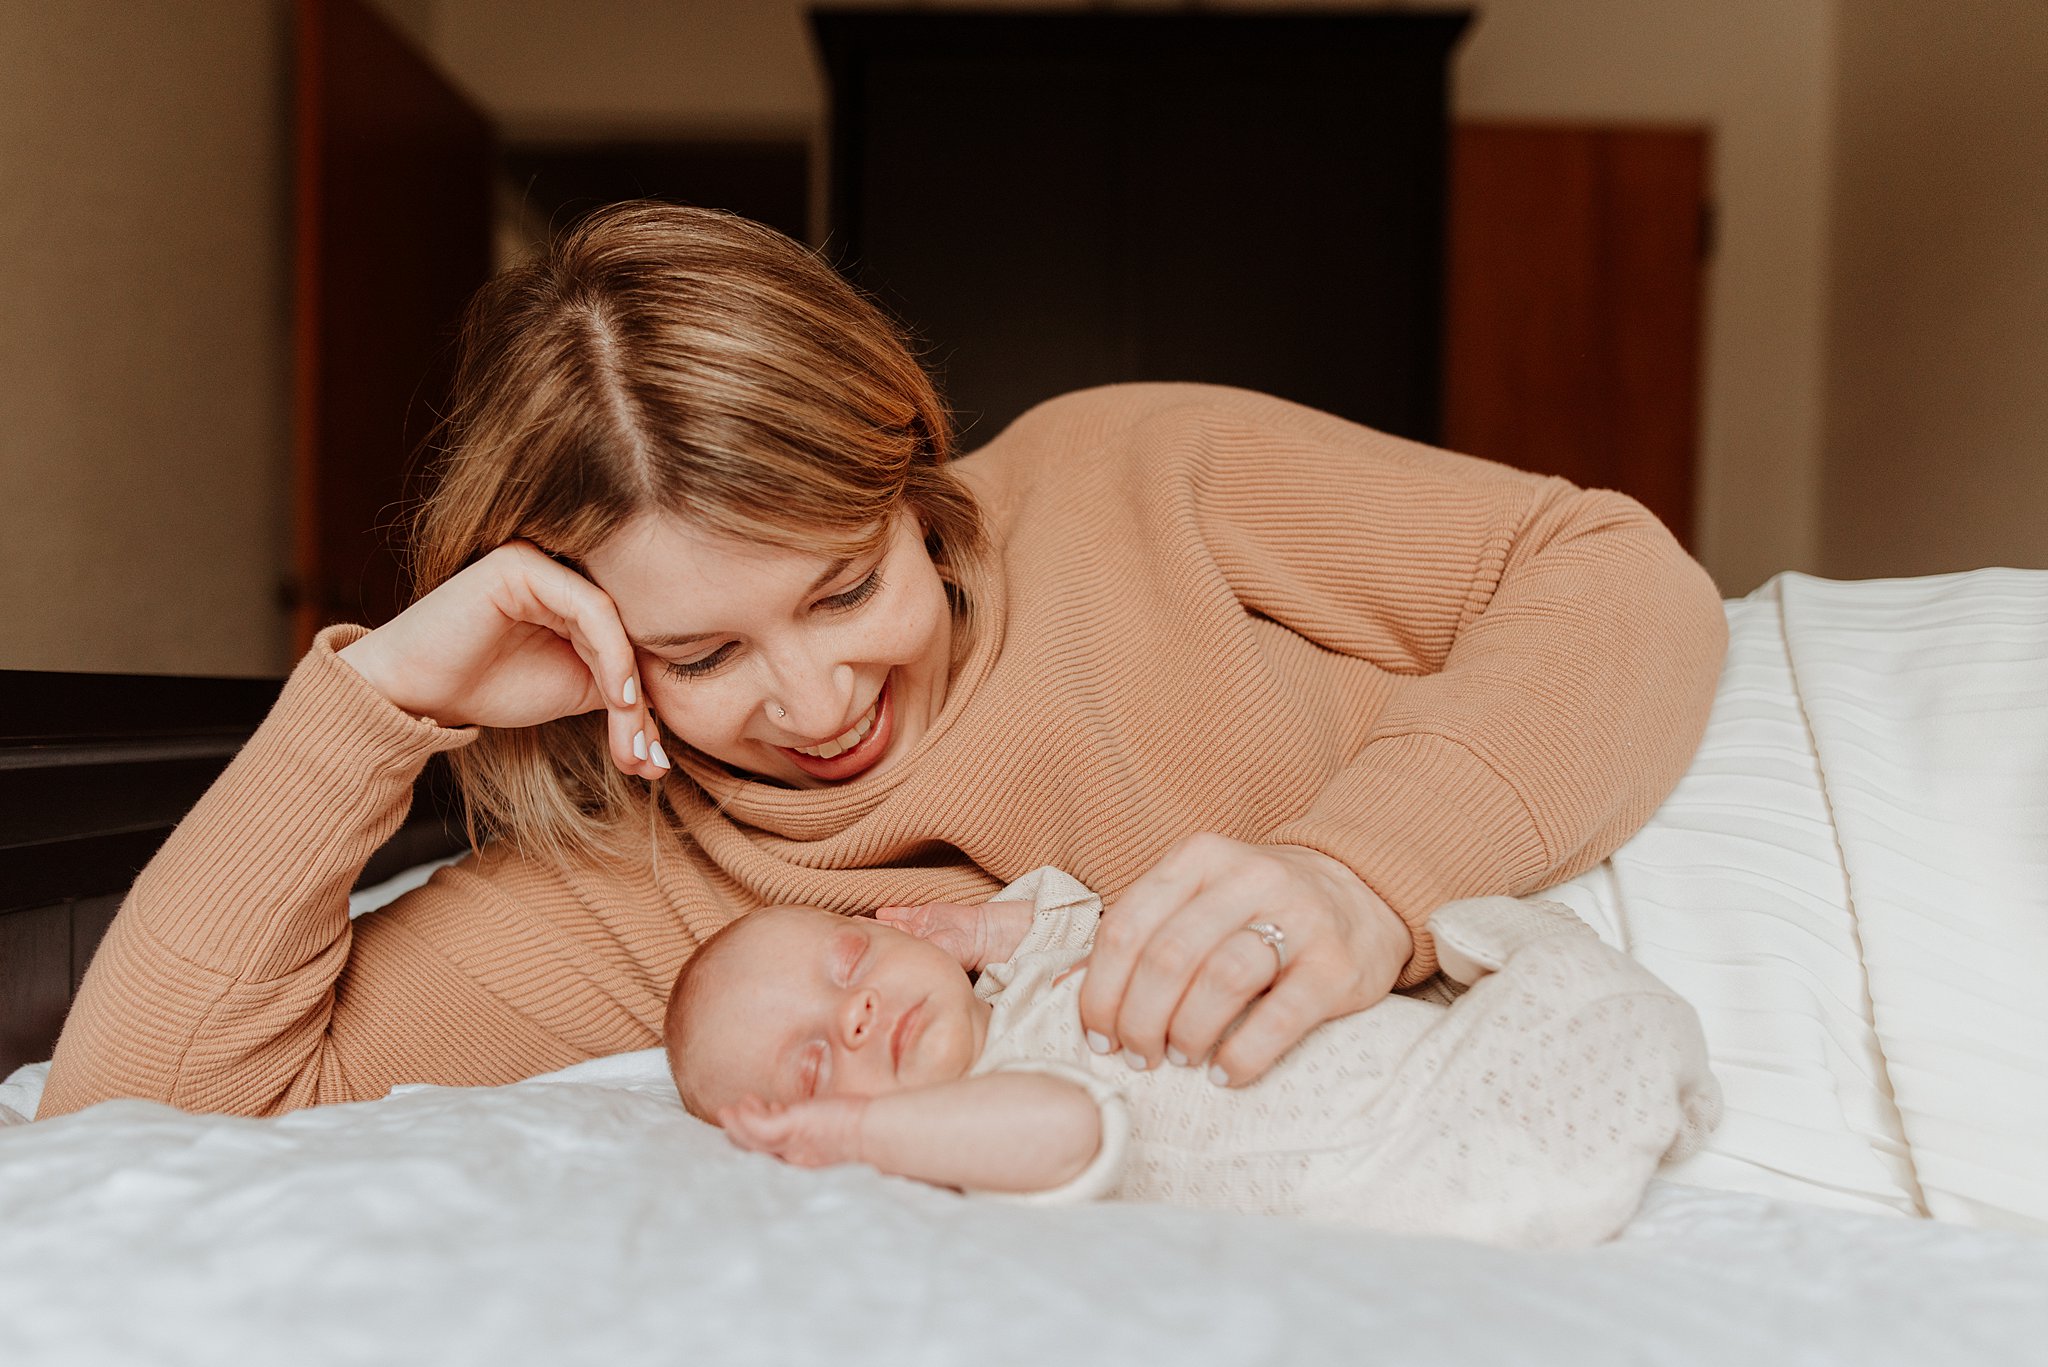 A mother in a peach sweater smiles while cuddling with her sleeping newborn baby on a bed after meeting vancouver lactation consultants